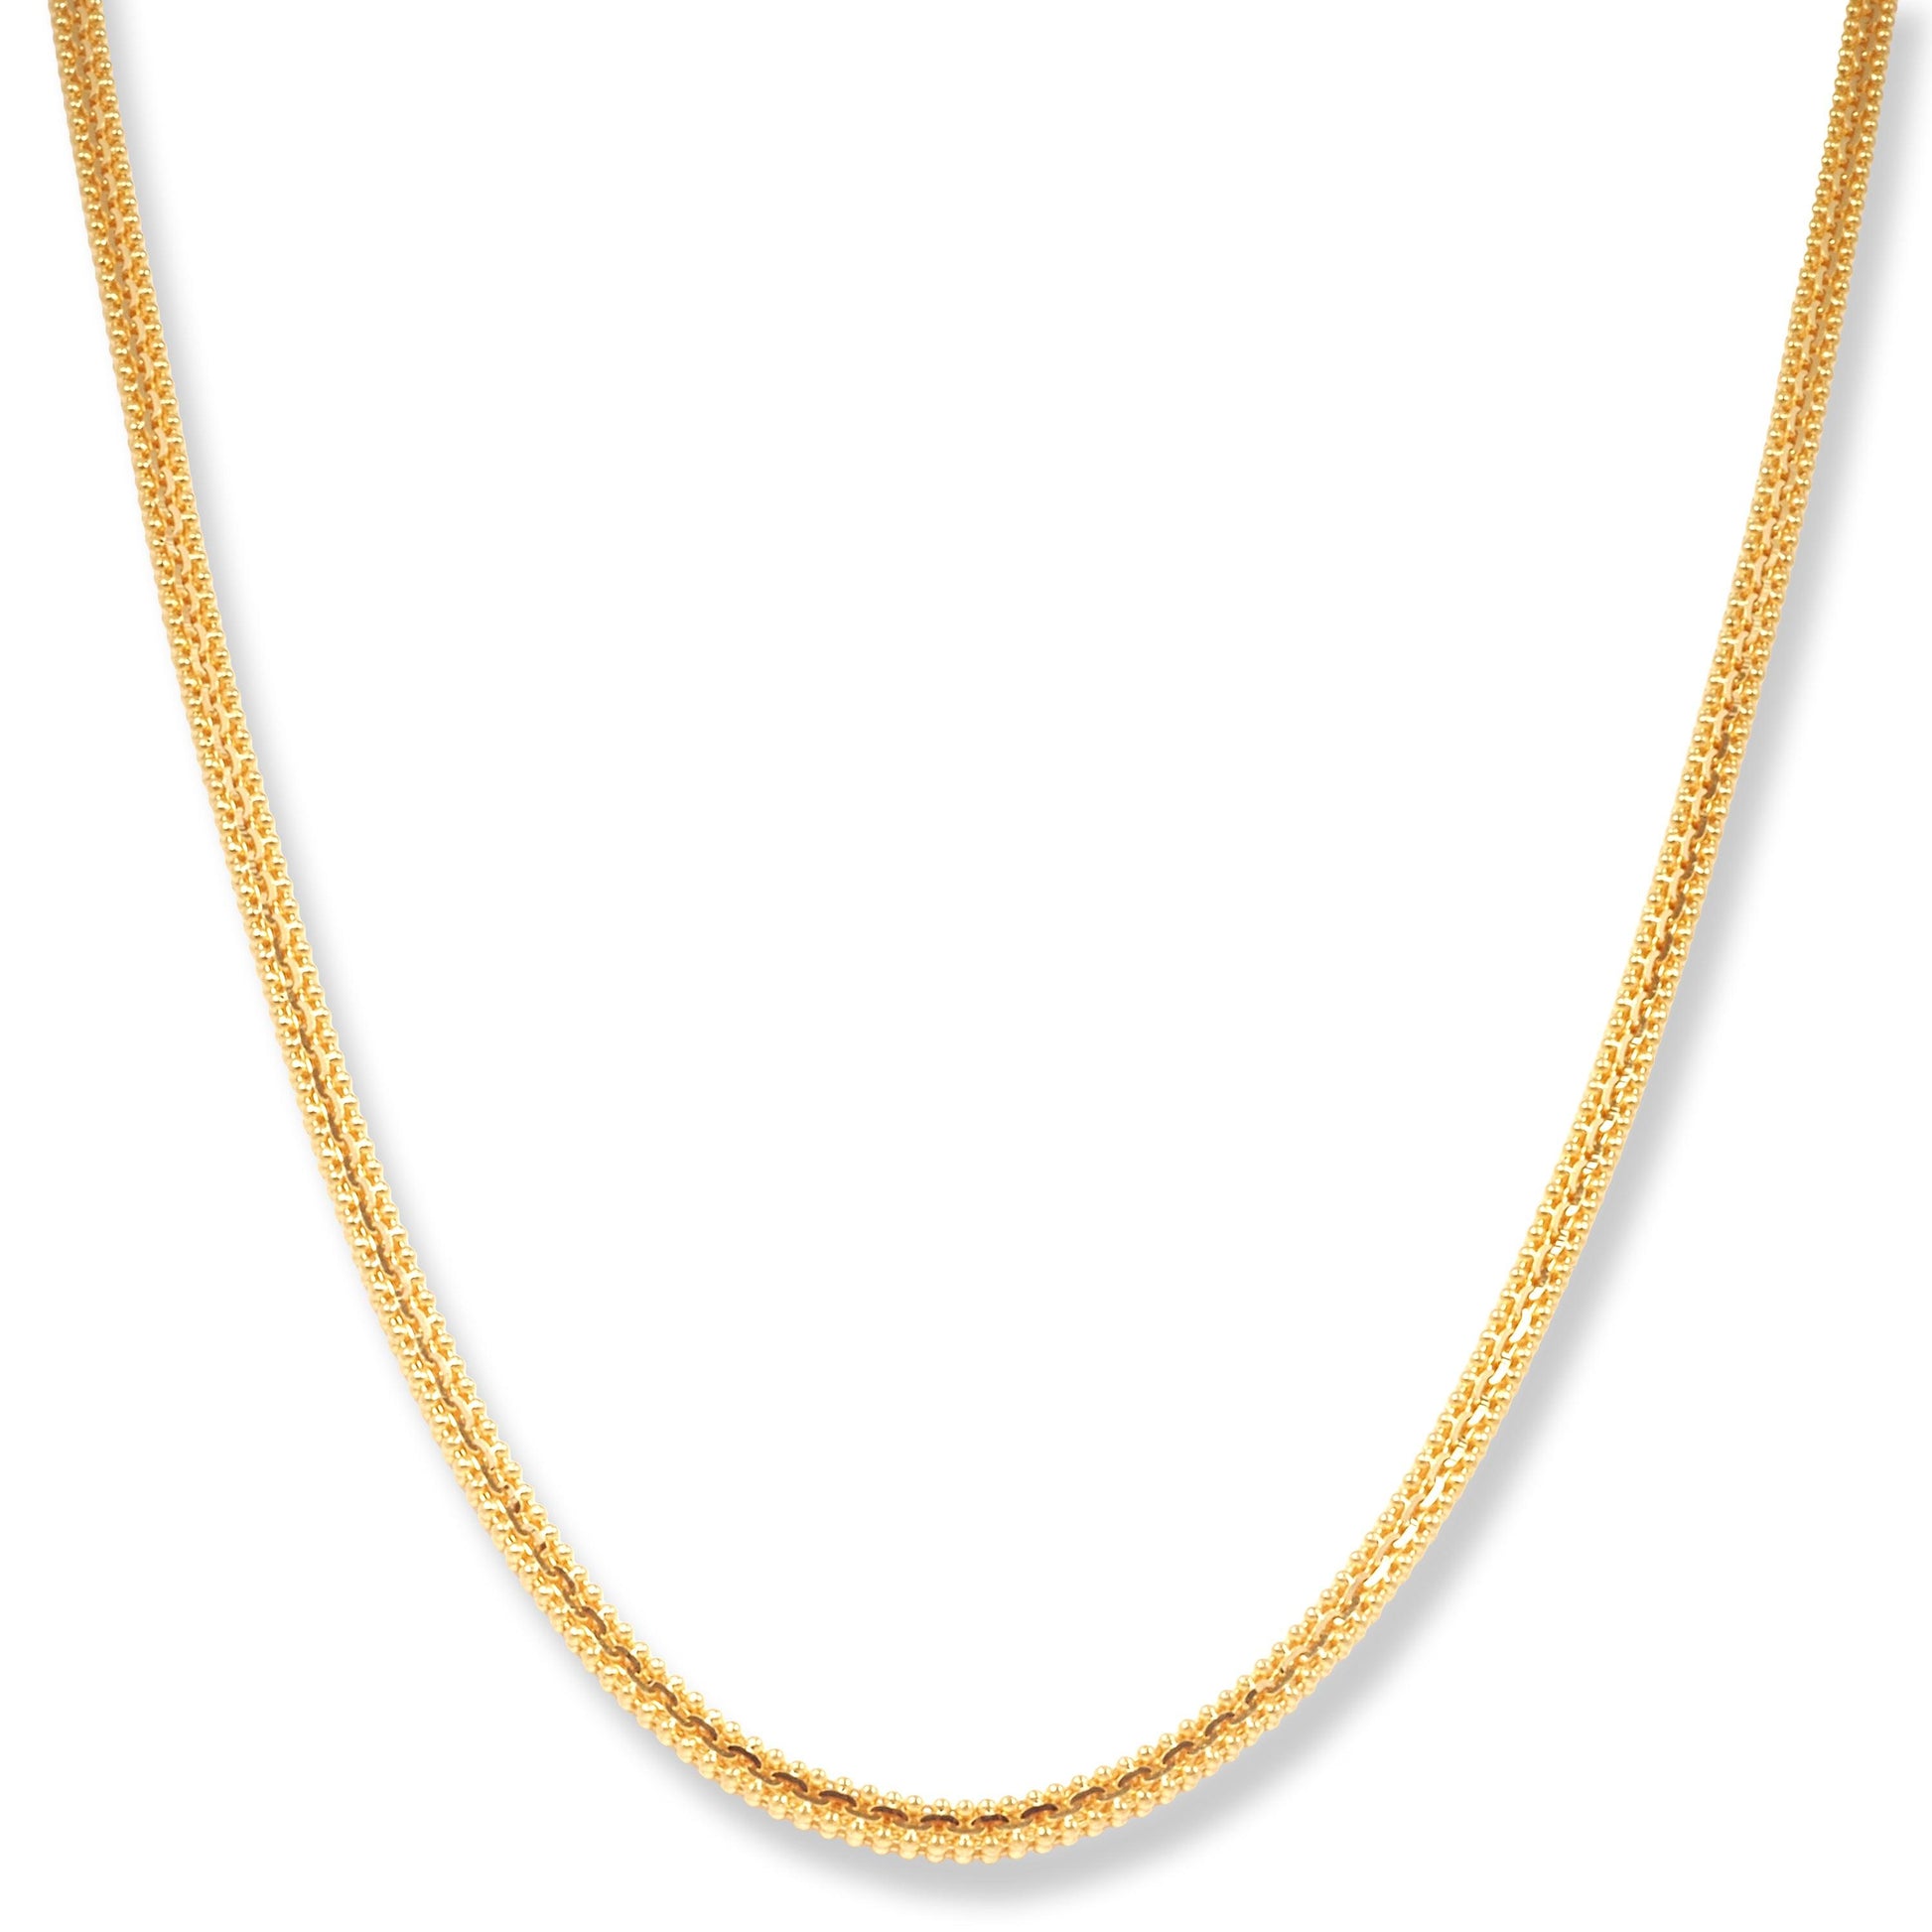 22ct Gold Double Sided Beaded Chain with Lobster Clasp C-1735 - Minar Jewellers